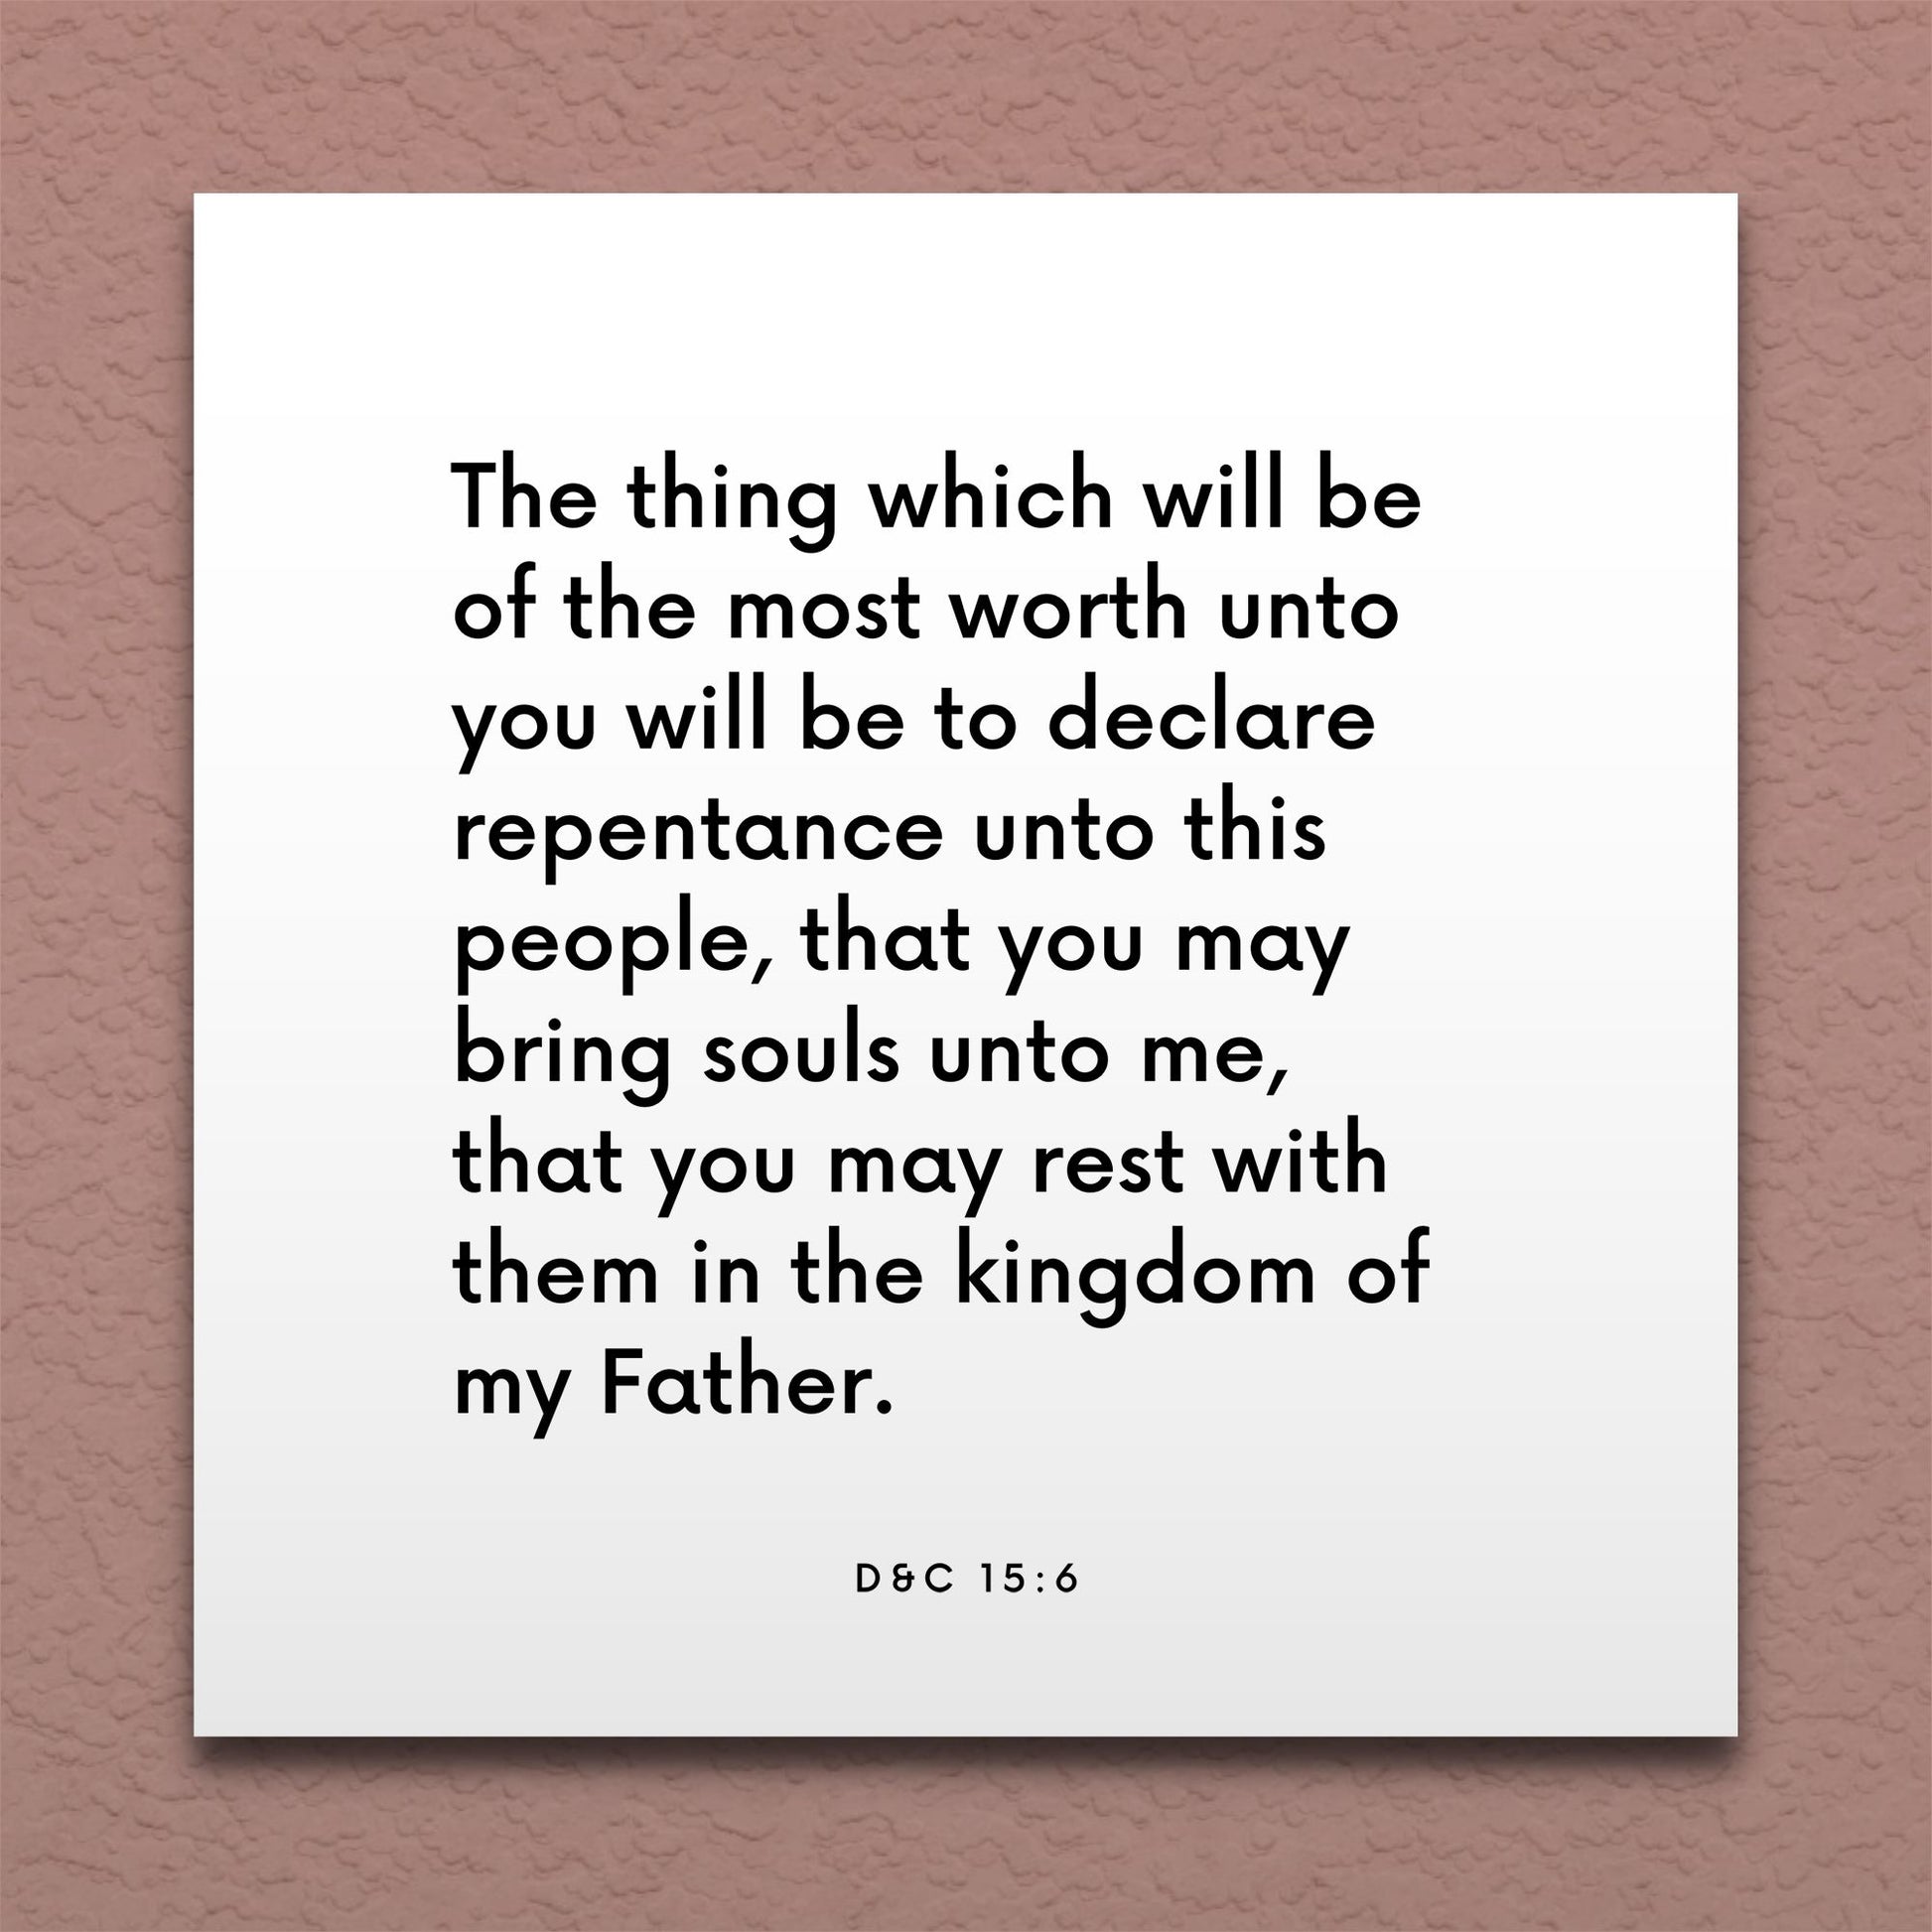 Wall-mounted scripture tile for D&C 15:6 - "The thing which will be of the most worth unto you"